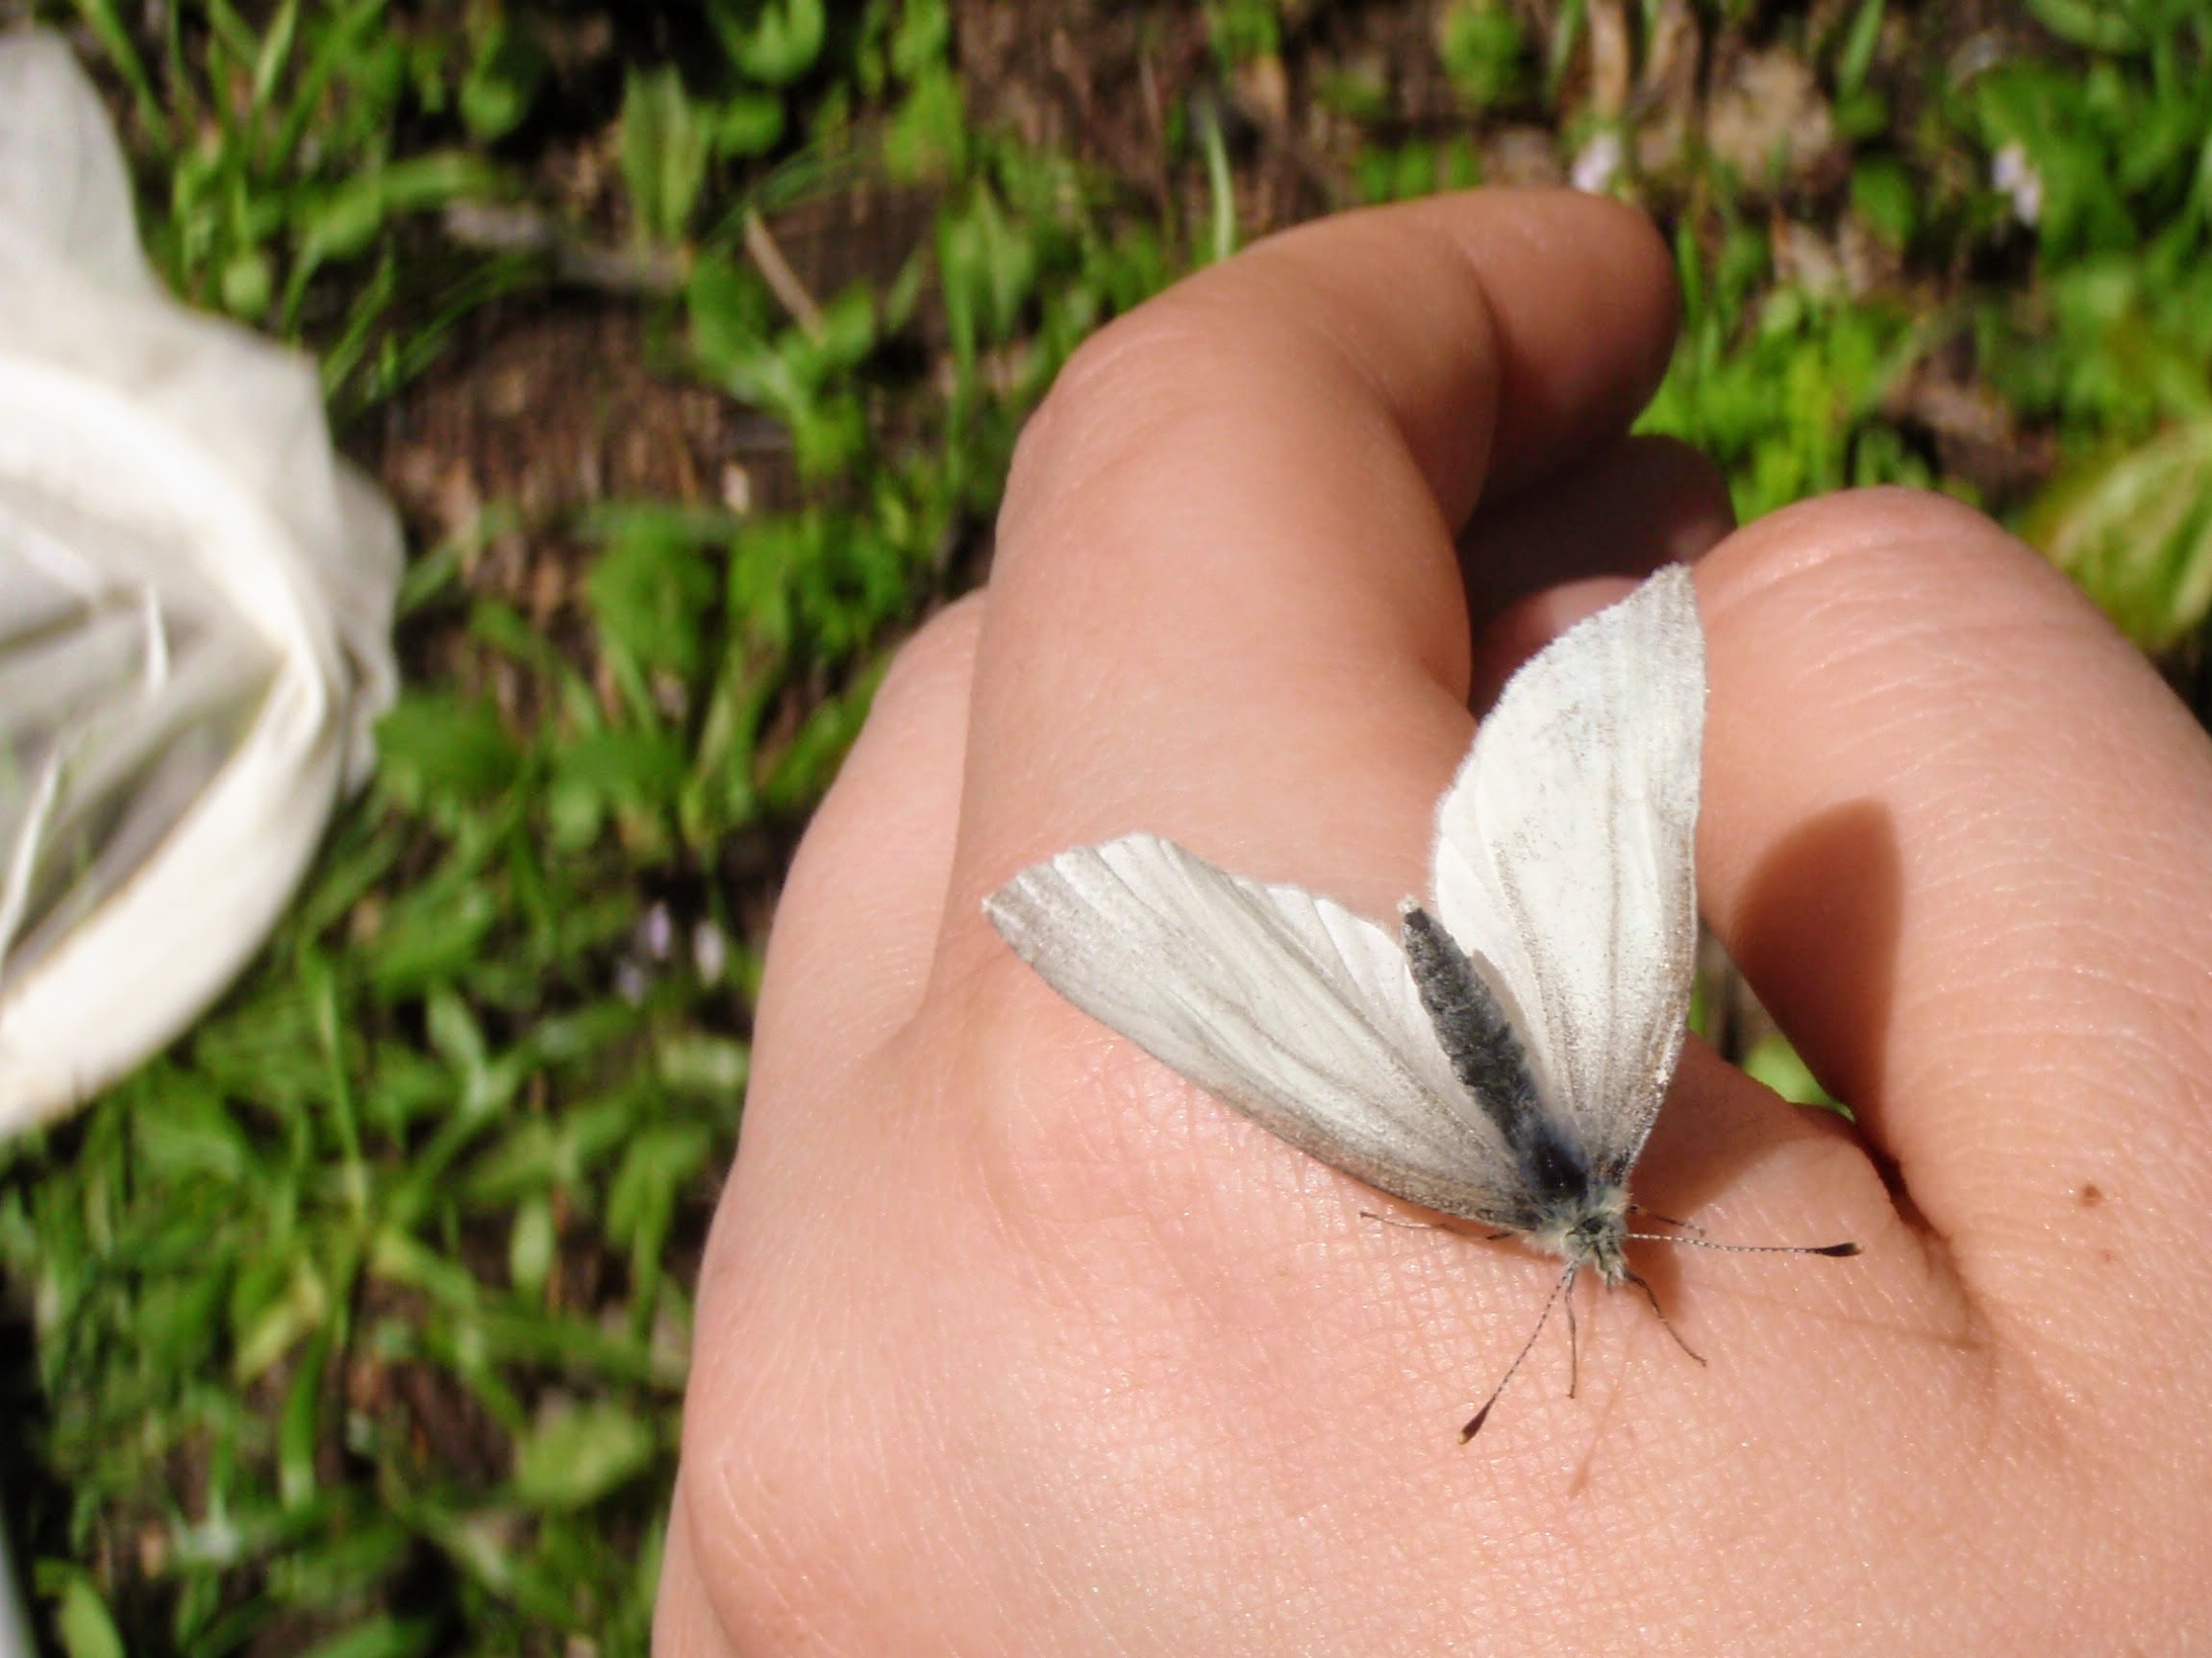 A West Virginia White butterfly, Pieris virginiensis, rests on a hand. 